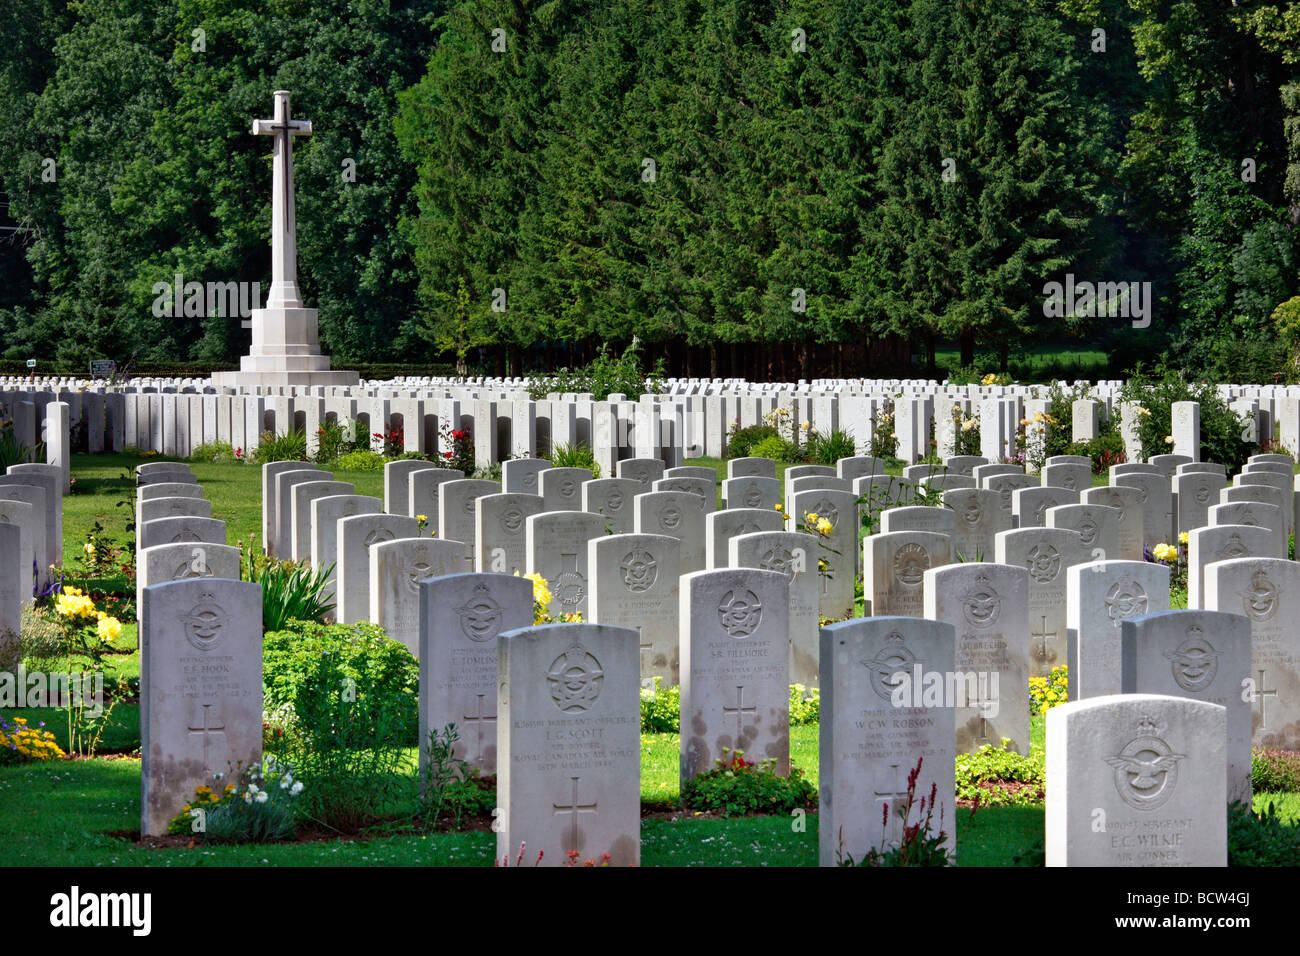 Durnbach War Cemetery, 2960 soldiers killed in action, World War 2, Durnbach, Upper Bavaria, Bavaria, Germany, Europe Stock Photo